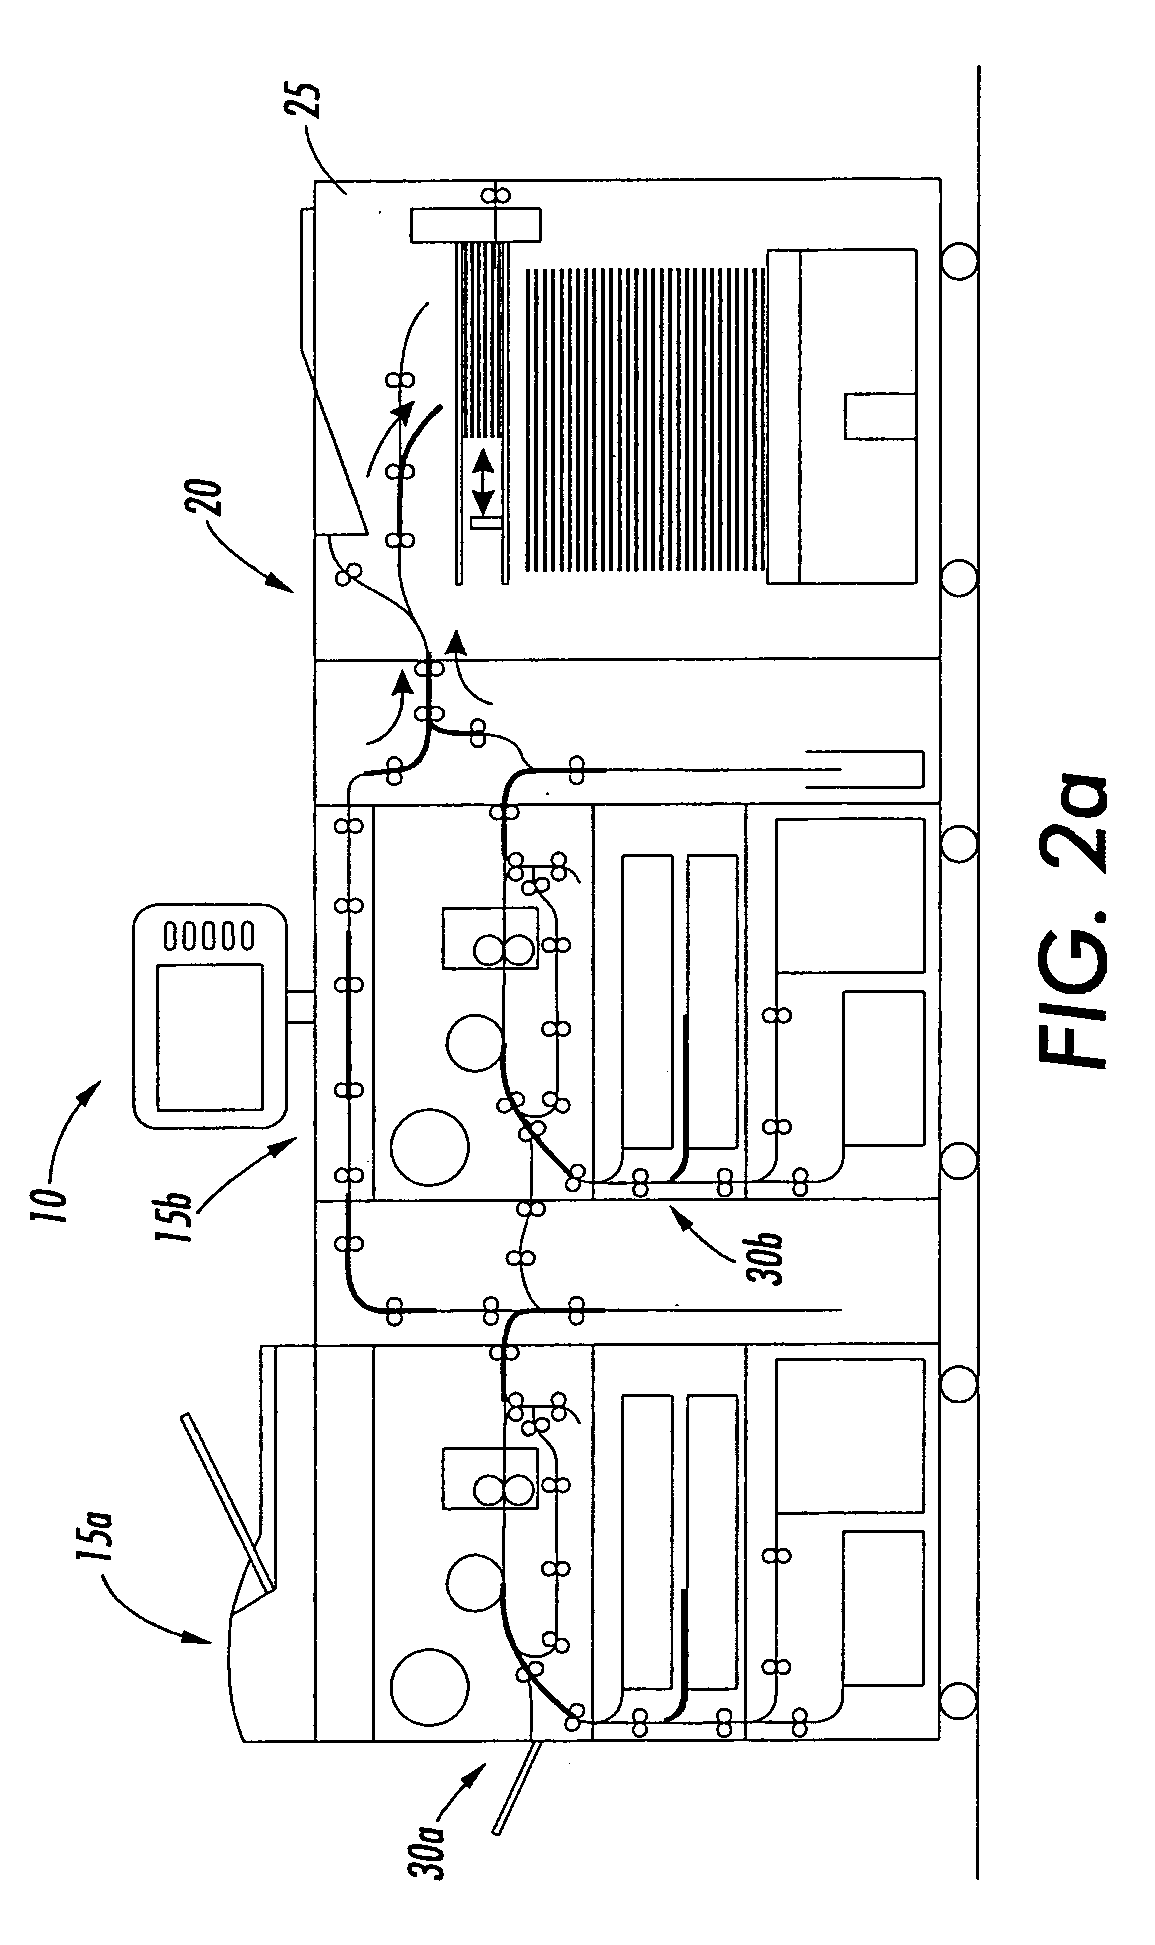 High print rate merging and finishing system for parallel printing